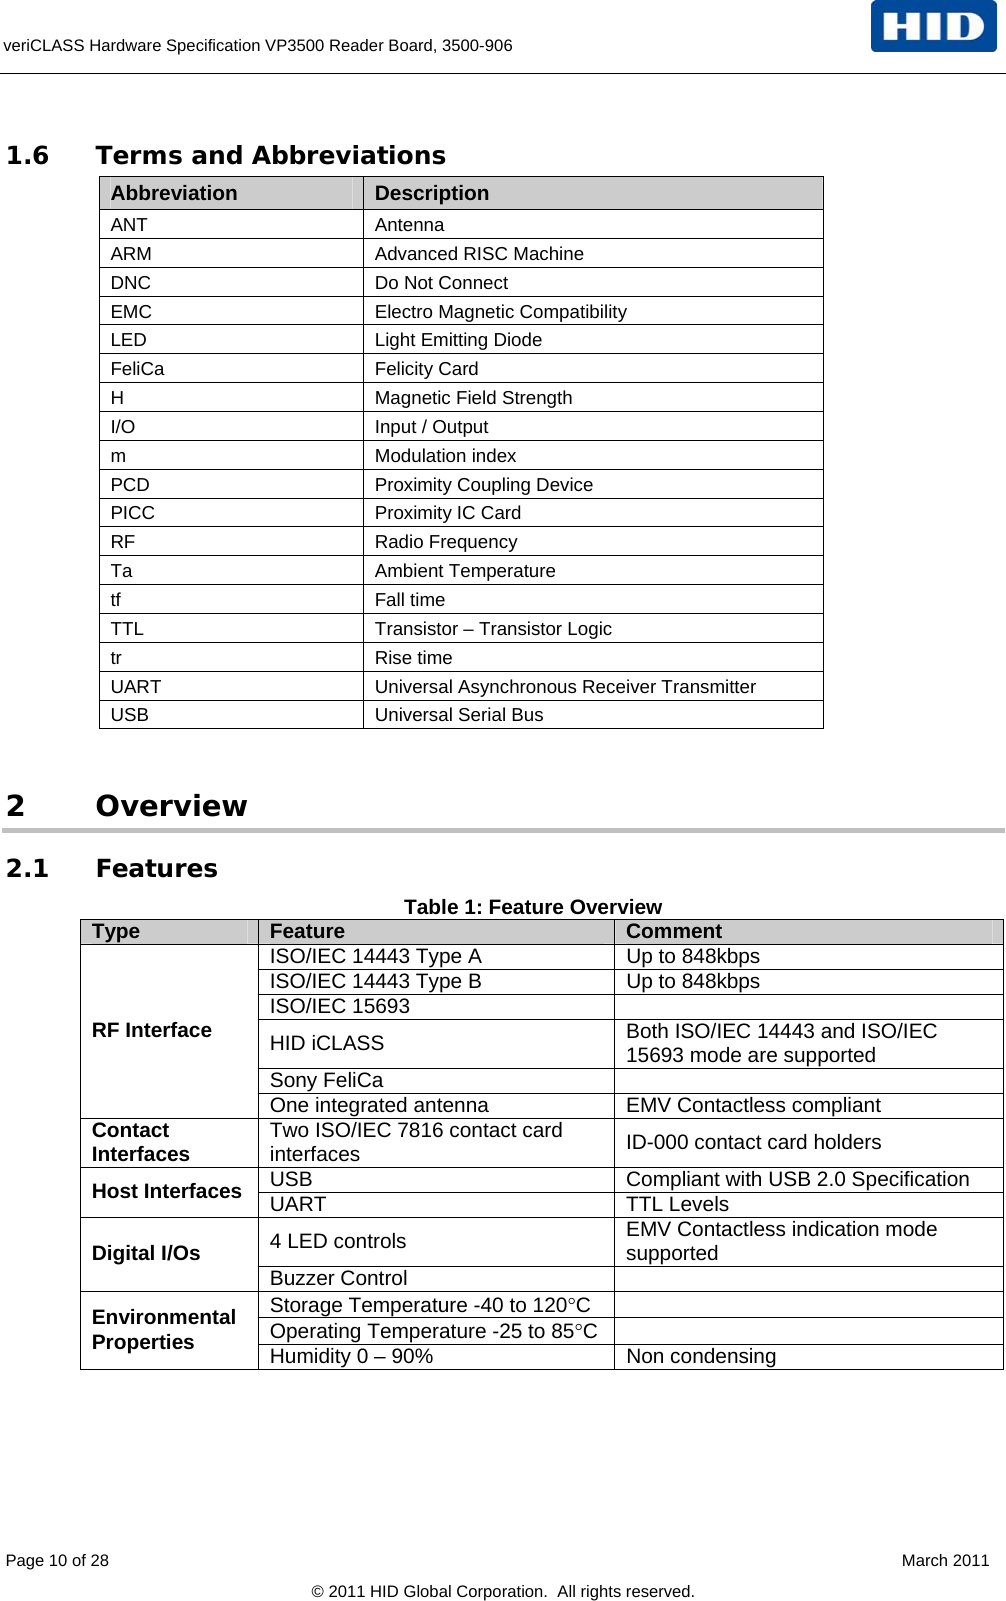  veriCLASS Hardware Specification VP3500 Reader Board, 3500-906   1.6 Terms and Abbreviations Abbreviation  Description ANT Antenna ARM  Advanced RISC Machine DNC  Do Not Connect EMC  Electro Magnetic Compatibility LED  Light Emitting Diode FeliCa Felicity Card H Magnetic Field Strength I/O  Input / Output m Modulation index PCD Proximity Coupling Device PICC  Proximity IC Card RF Radio Frequency Ta Ambient Temperature tf Fall time TTL  Transistor – Transistor Logic tr Rise time UART  Universal Asynchronous Receiver Transmitter USB  Universal Serial Bus  2 Overview 2.1 Features Table 1: Feature Overview Type  Feature  Comment ISO/IEC 14443 Type A  Up to 848kbps ISO/IEC 14443 Type B  Up to 848kbps ISO/IEC 15693   HID iCLASS  Both ISO/IEC 14443 and ISO/IEC 15693 mode are supported Sony FeliCa   RF Interface One integrated antenna  EMV Contactless compliant Contact Interfaces  Two ISO/IEC 7816 contact card interfaces  ID-000 contact card holders USB  Compliant with USB 2.0 Specification Host Interfaces  UART TTL Levels 4 LED controls  EMV Contactless indication mode supported Digital I/Os   Buzzer Control   Storage Temperature -40 to 120C   Operating Temperature -25 to 85C   Environmental Properties  Humidity 0 – 90%   Non condensing  Page 10 of 28    March 2011 © 2011 HID Global Corporation.  All rights reserved. 